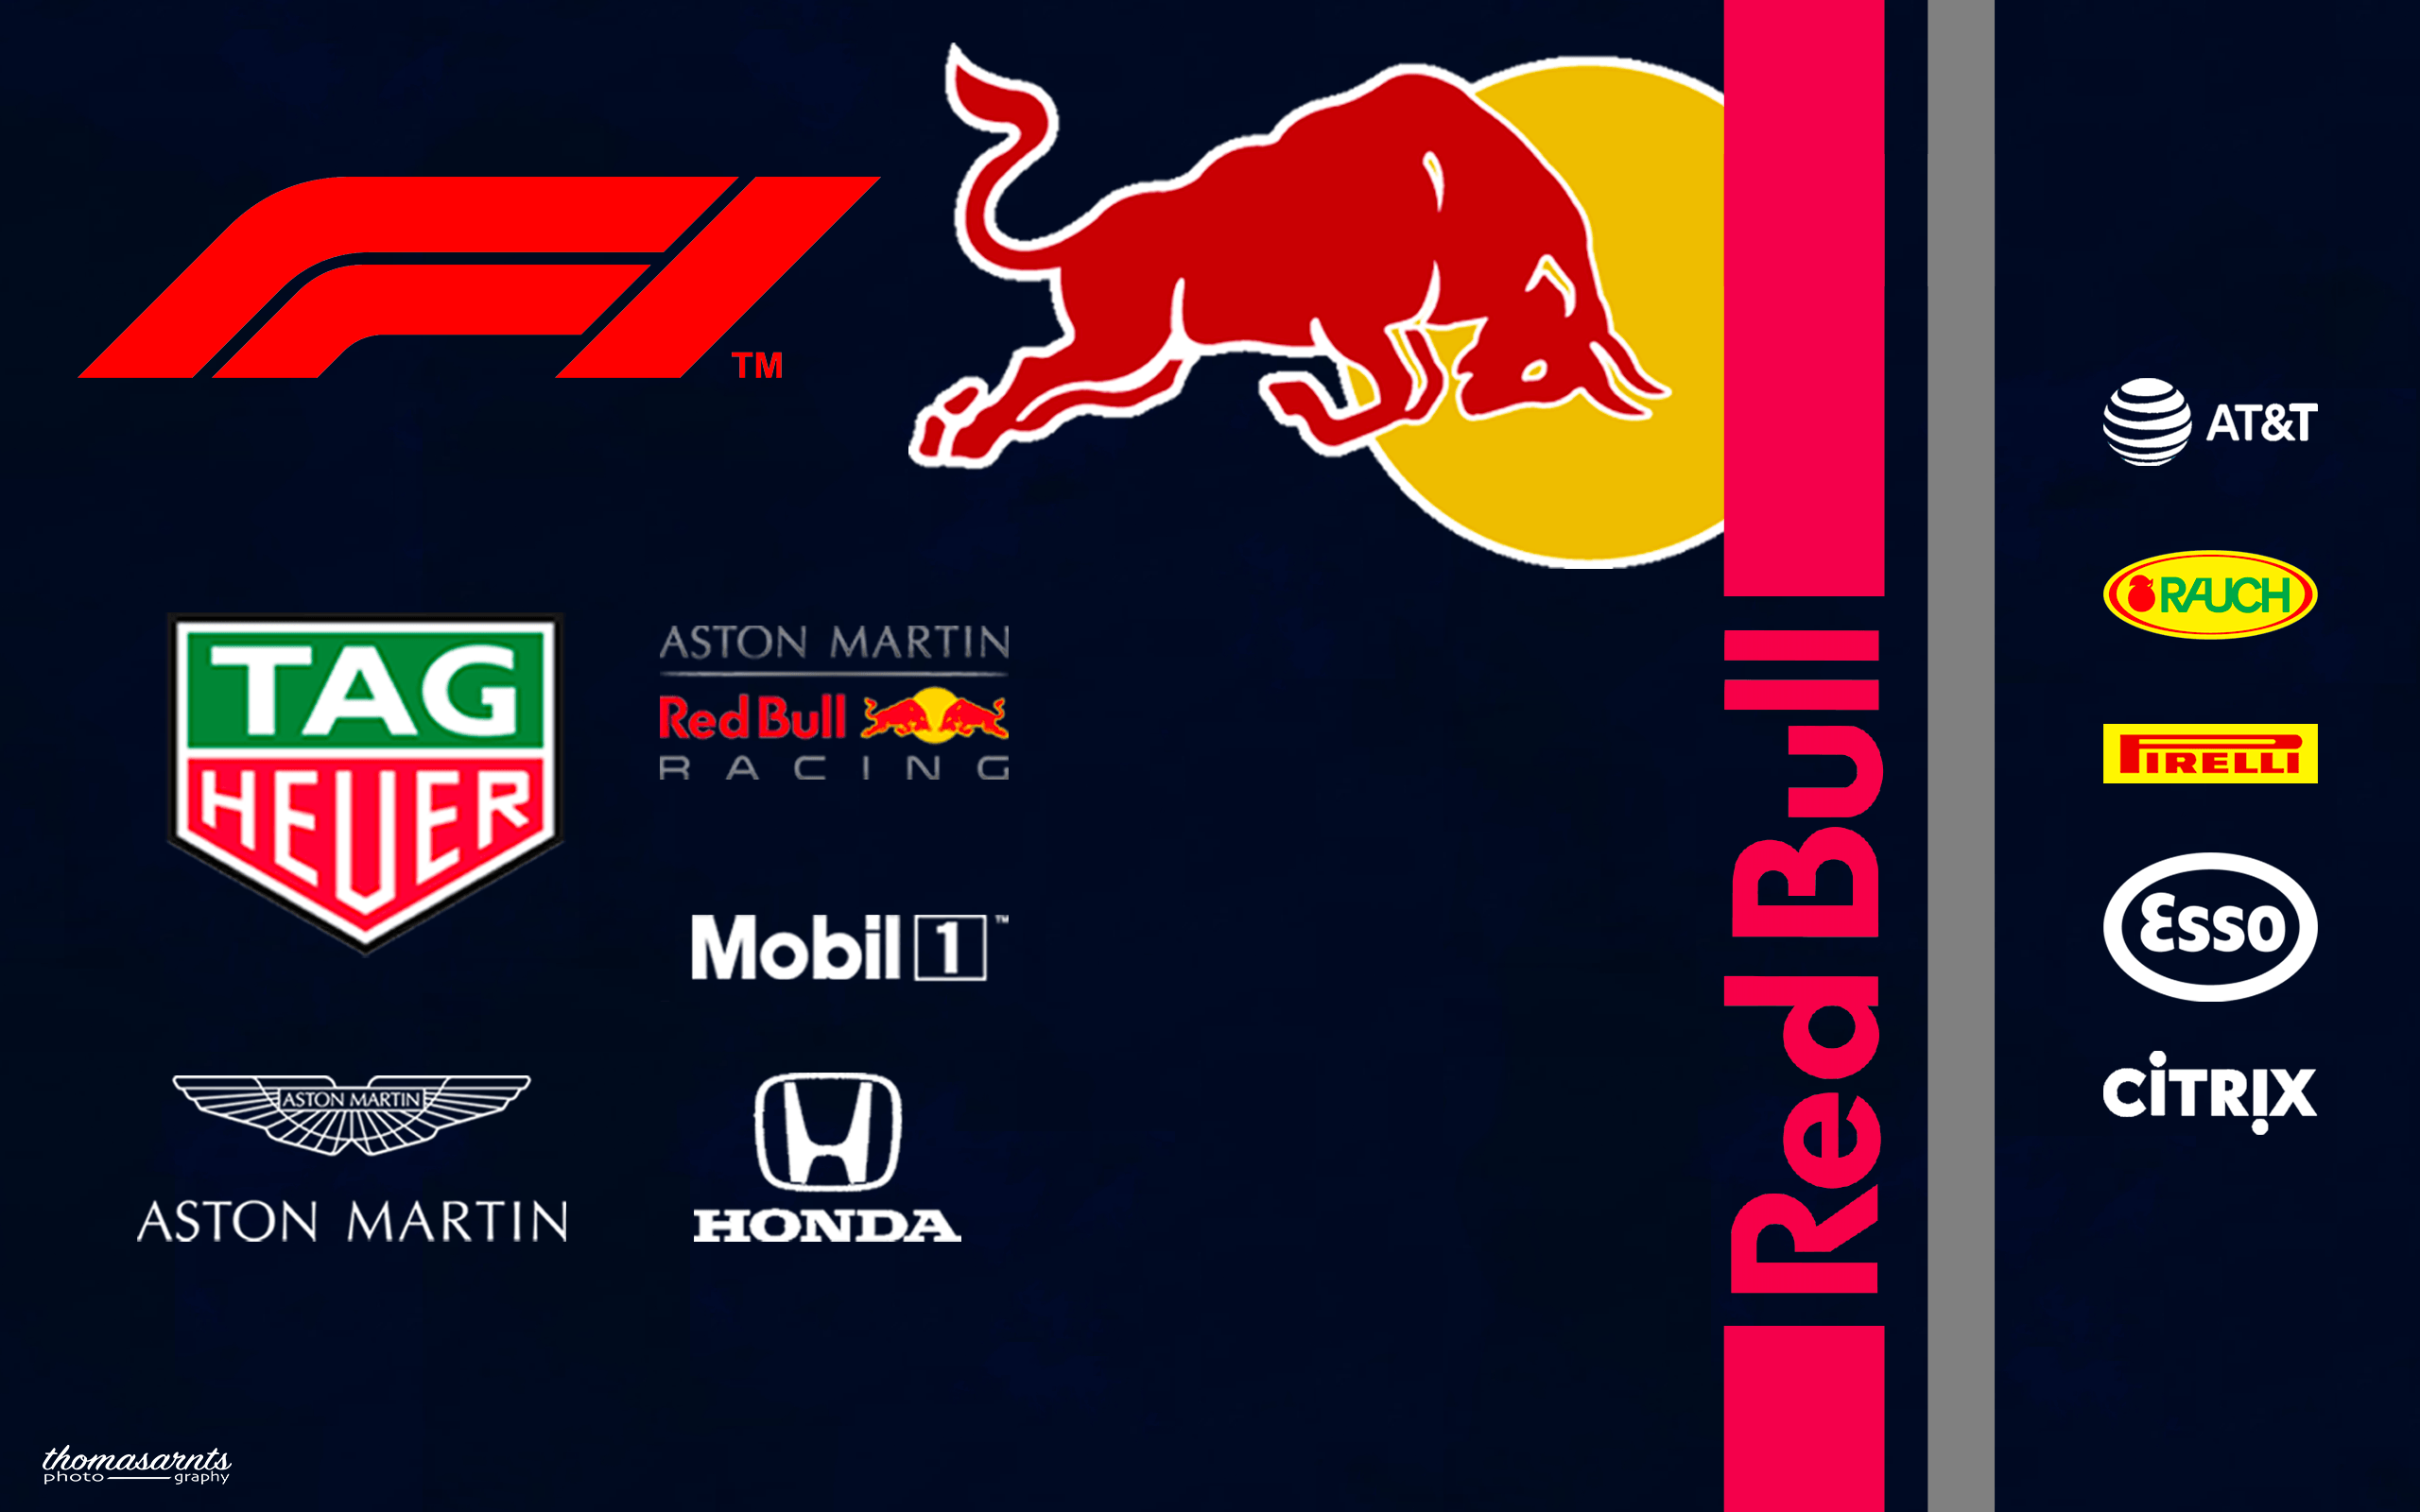 for people who are interested, here's a rbr wallpaper